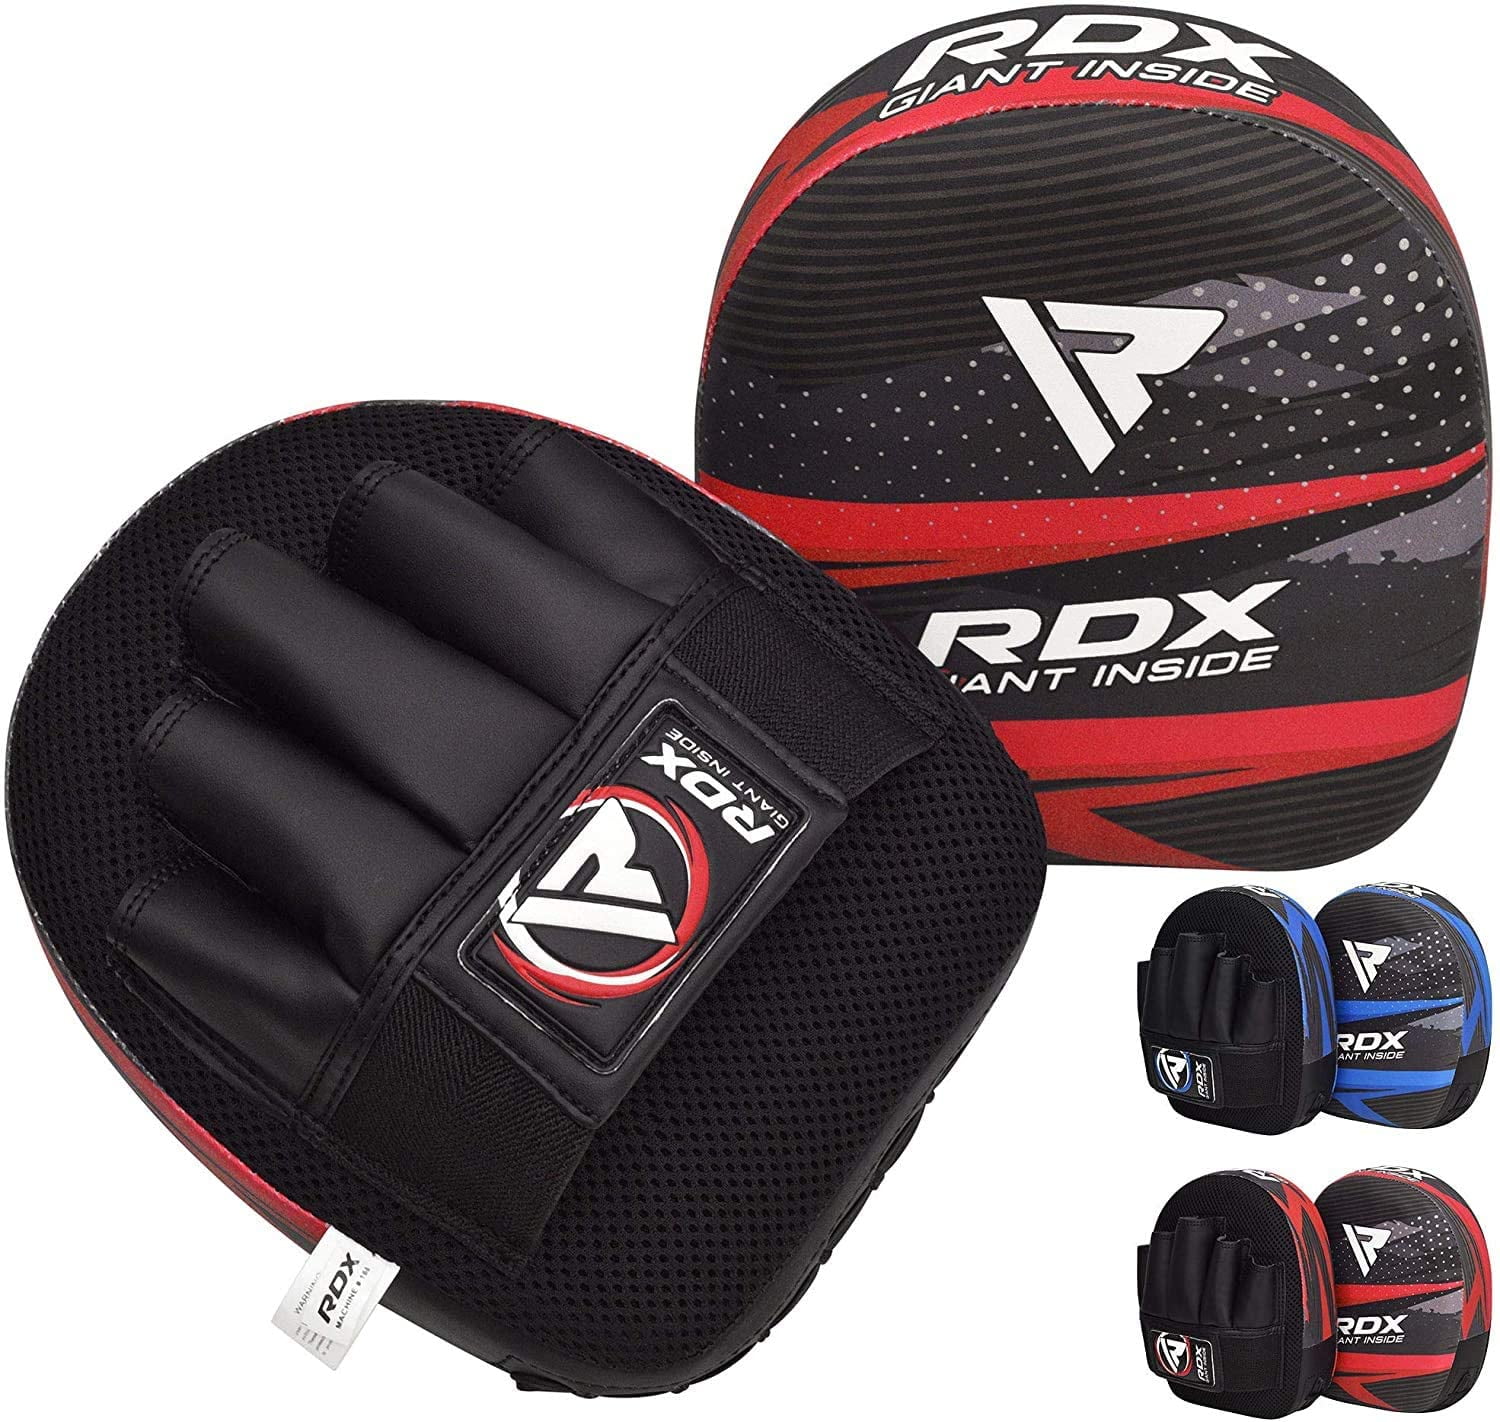 RDX Kids Boxing Pads Focus Mitts Martial Arts Kickboxing and Karate Training Maya hide leather Curved Junior Hook and Jab Target Hand Pads Muay Thai Great for Youth MMA Coaching Strike Shield